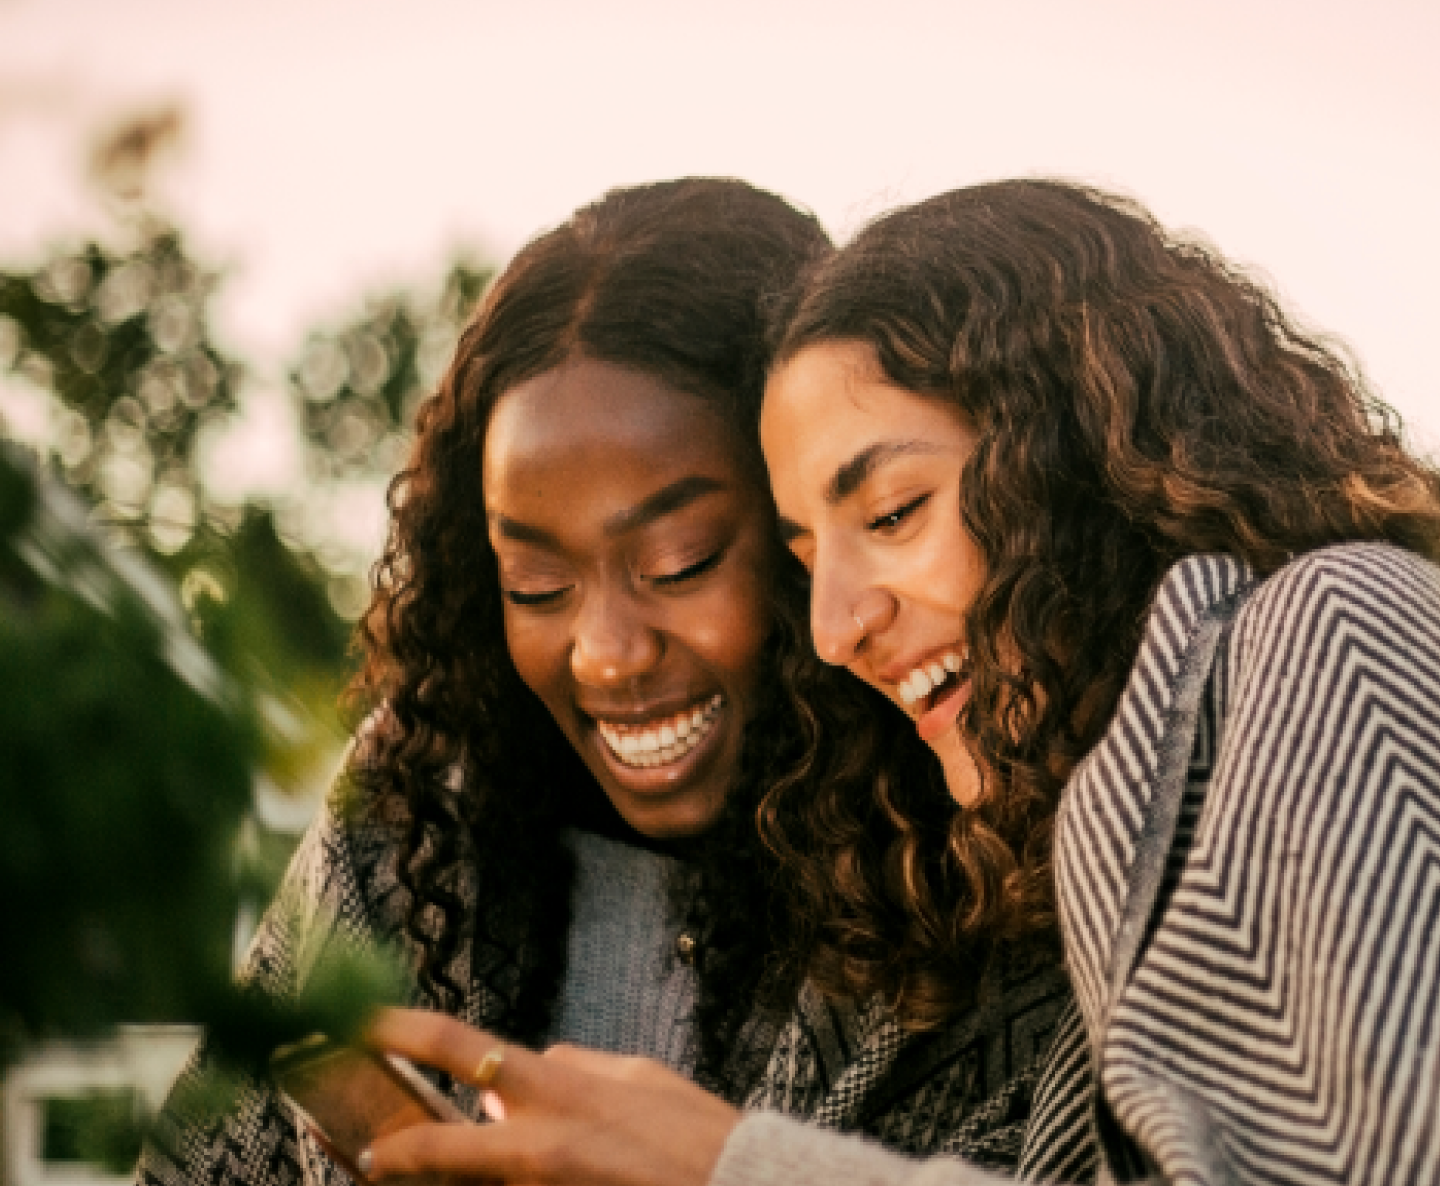 two friends with curly hair smiling looking at a mobile phone